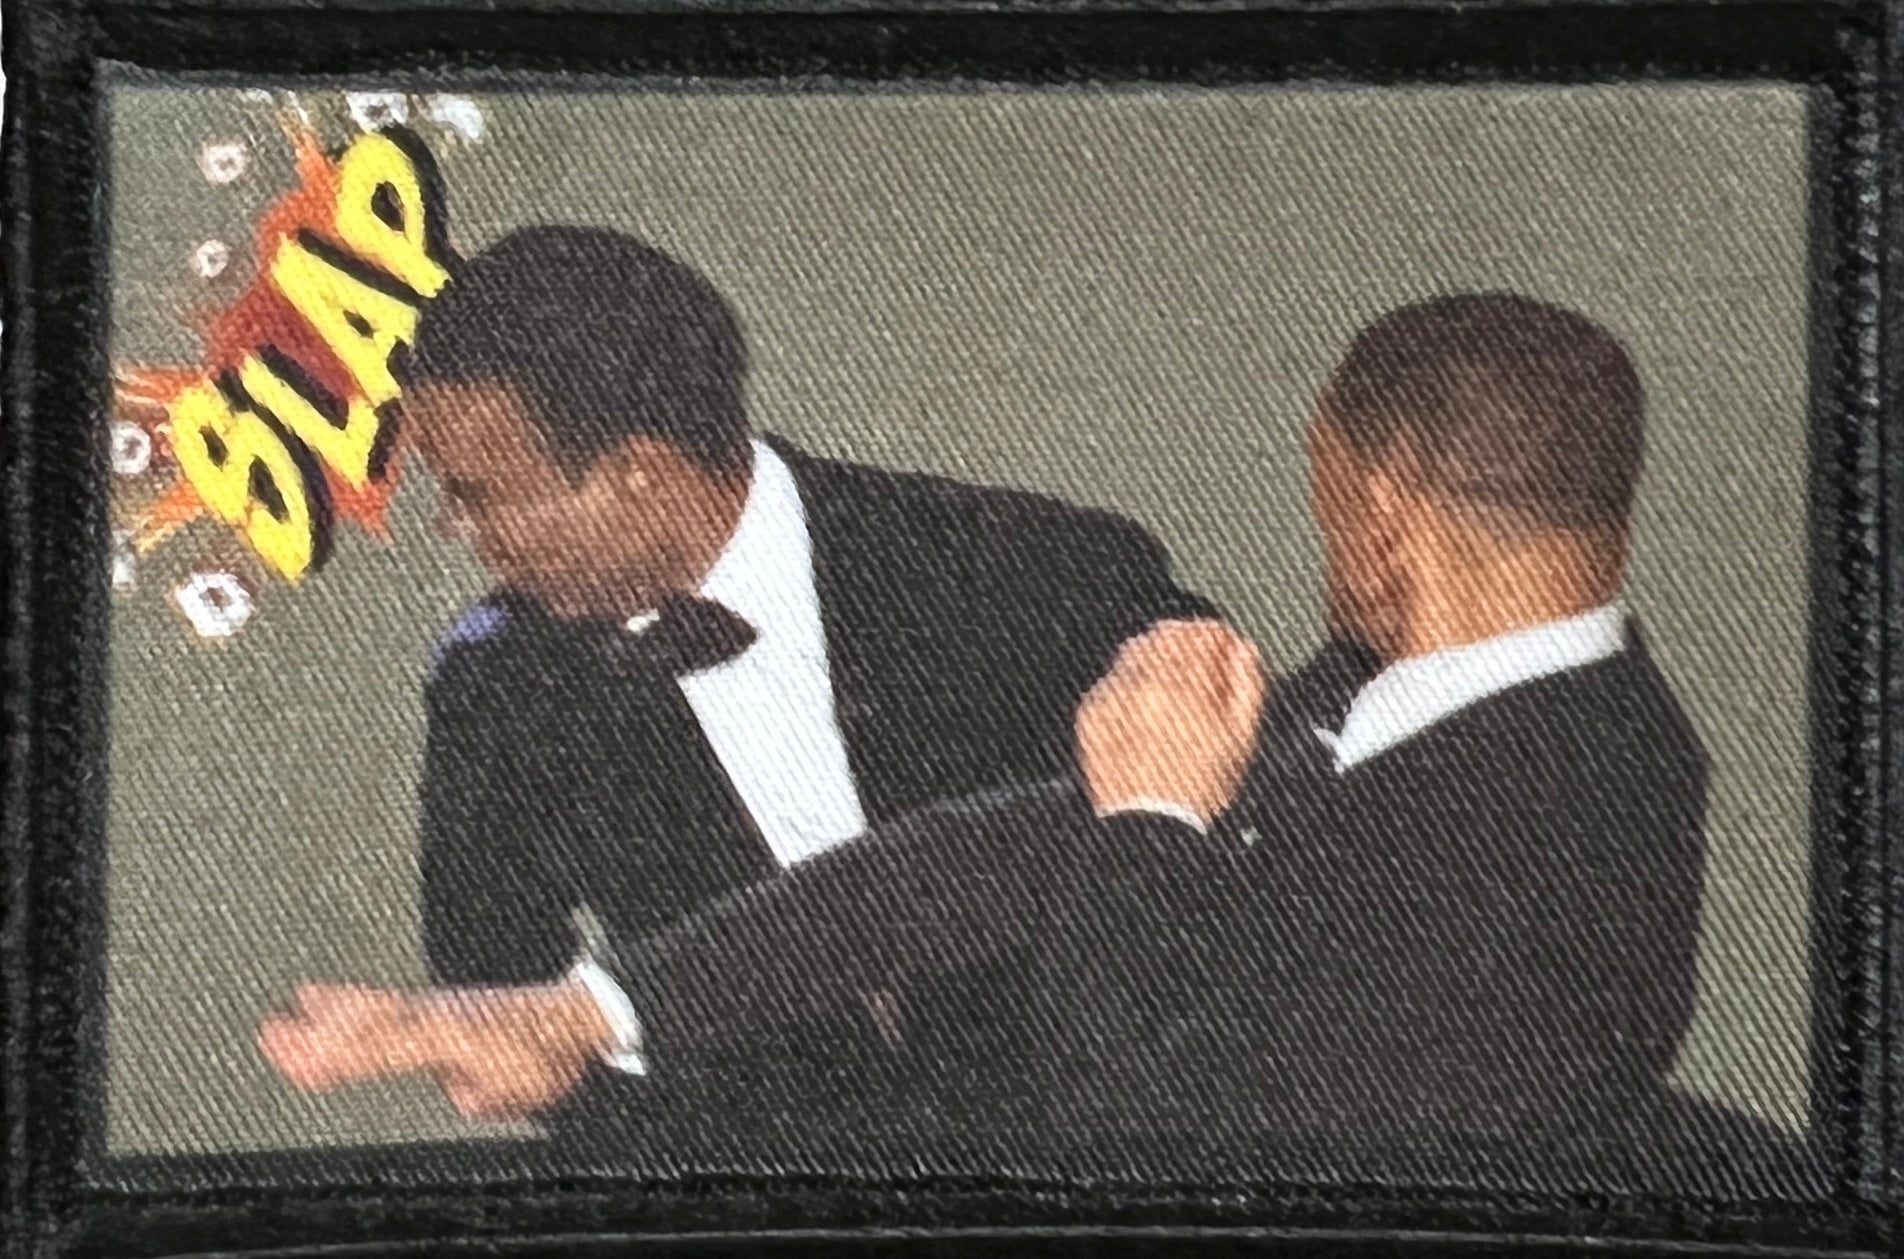 Will Smith SLAP Morale Patch